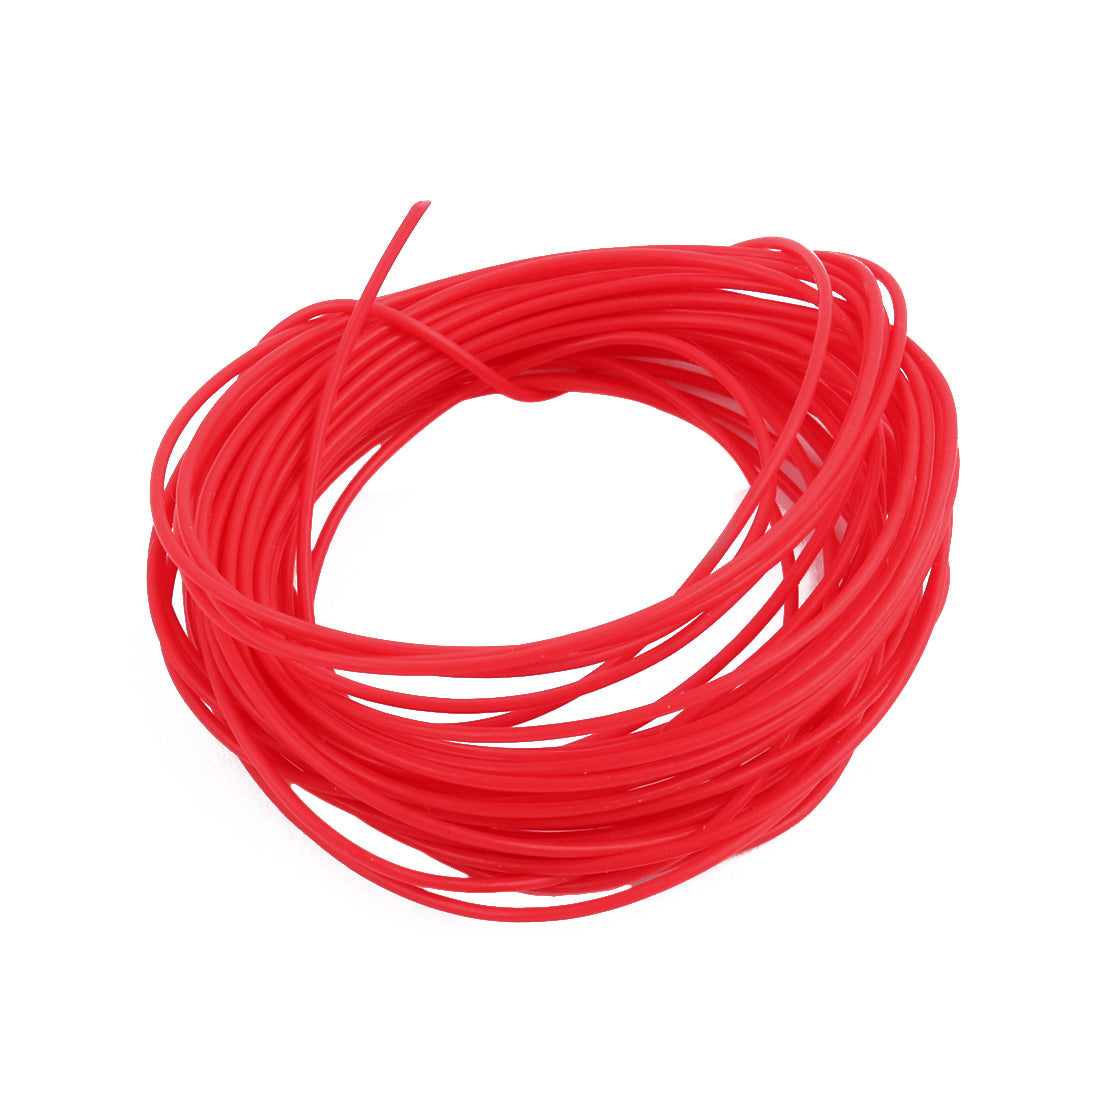 Uxcell Uxcell 0.81mmx1.11mm PTFE Resistant High Temperature Red Tubing 5 Meters 16.4Ft